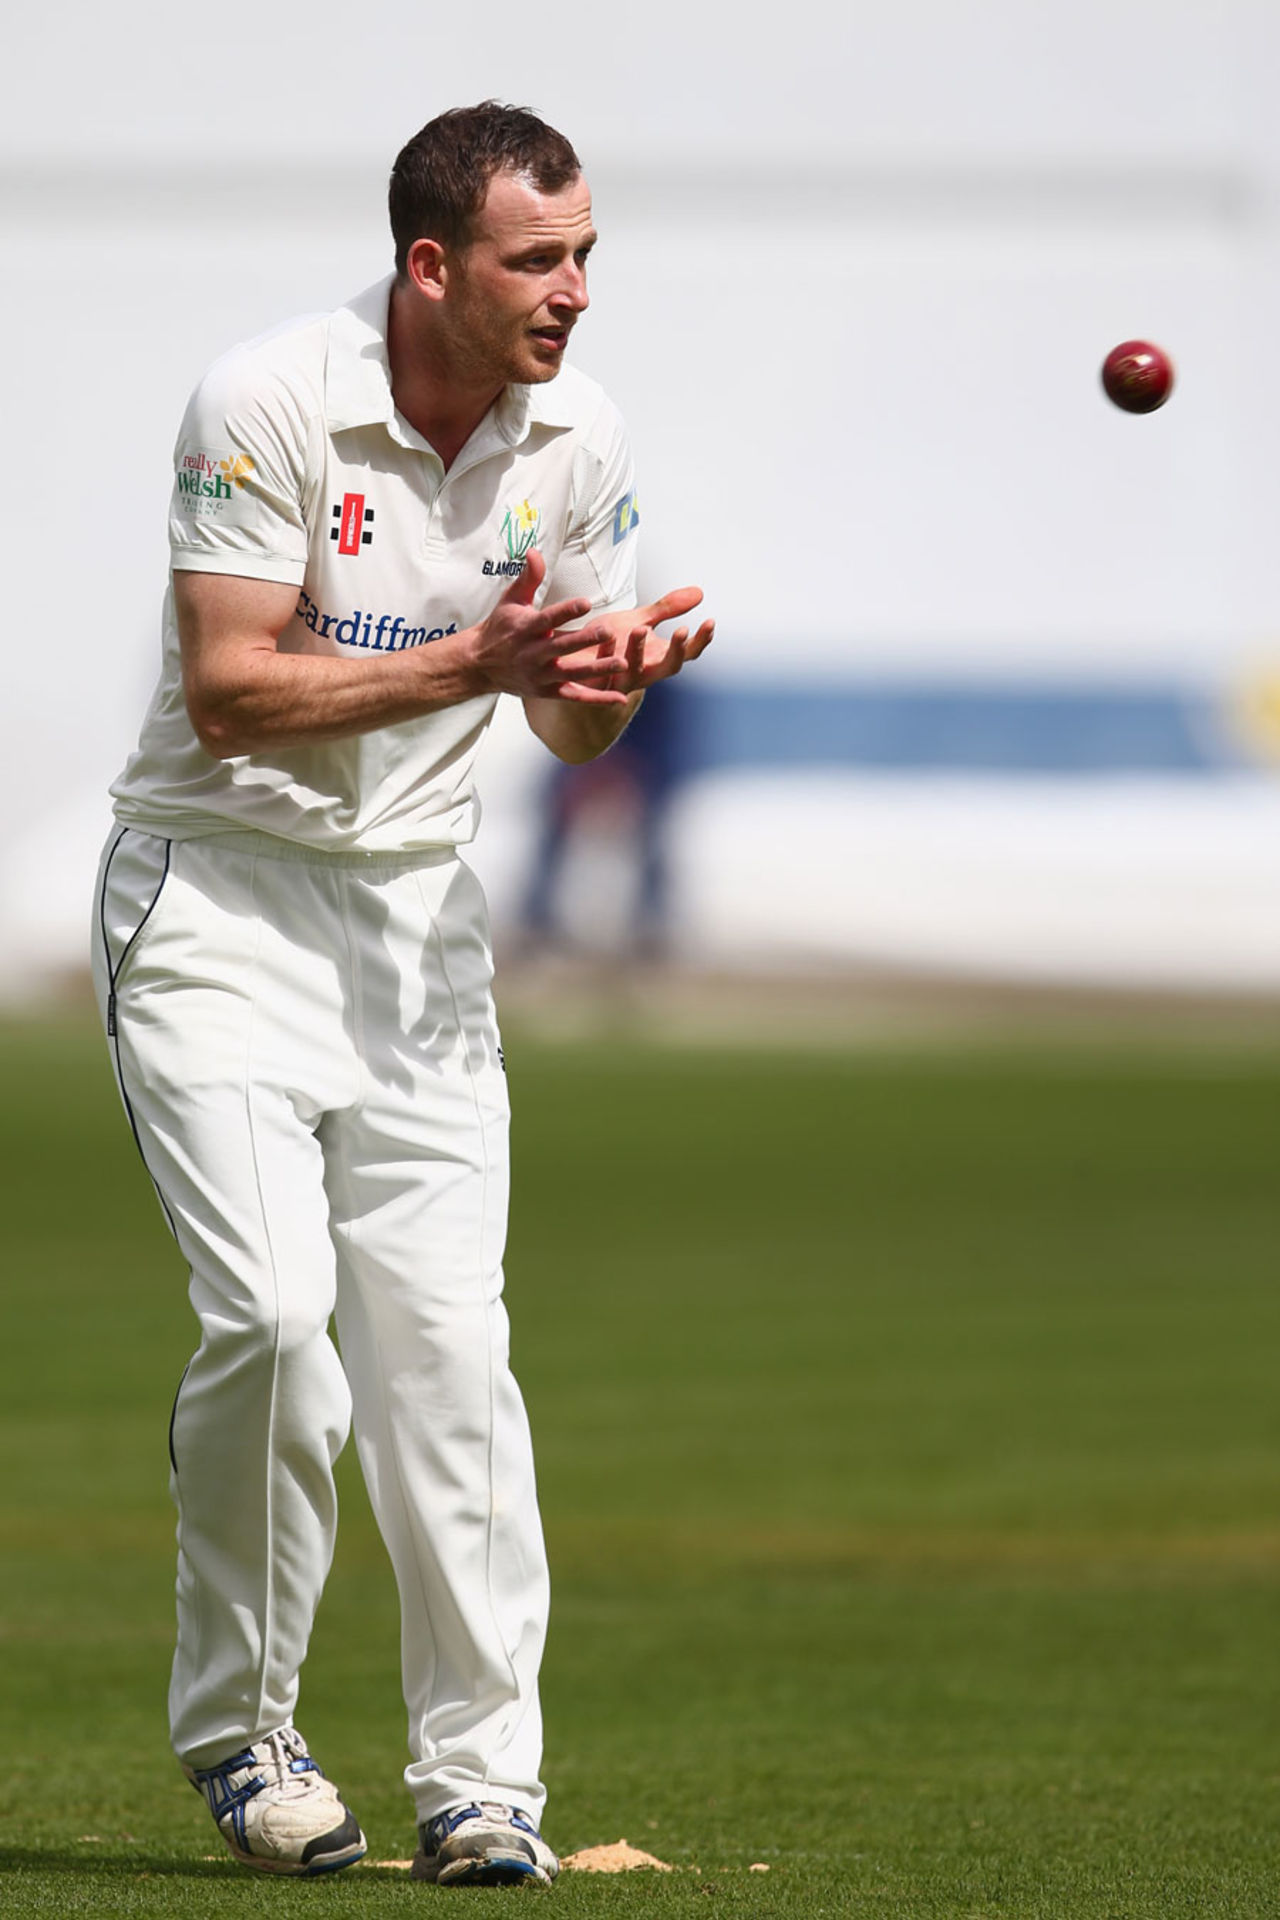 Graeme Wagg took a wicket with his fourth delivery, Glamorgan v Worcestershire, County Championship, Division Two, Cardiff, 3rd day, April 19, 2013